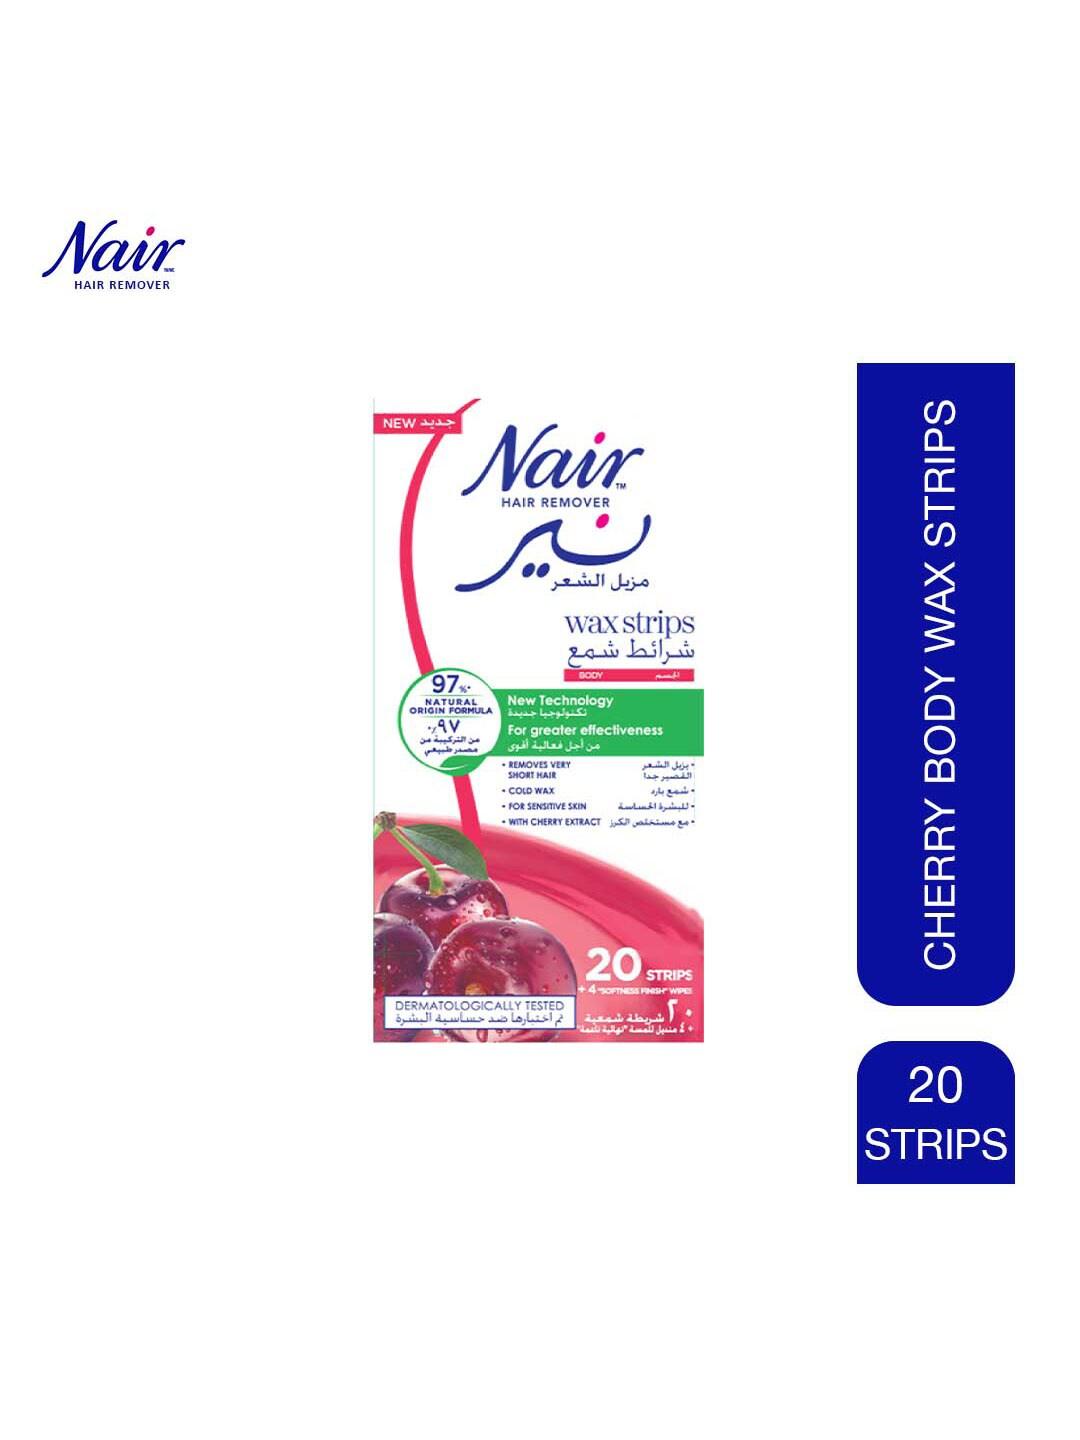 Nair Cherry Cold Body Wax with Post-Waxing Wipes - 20 Strips